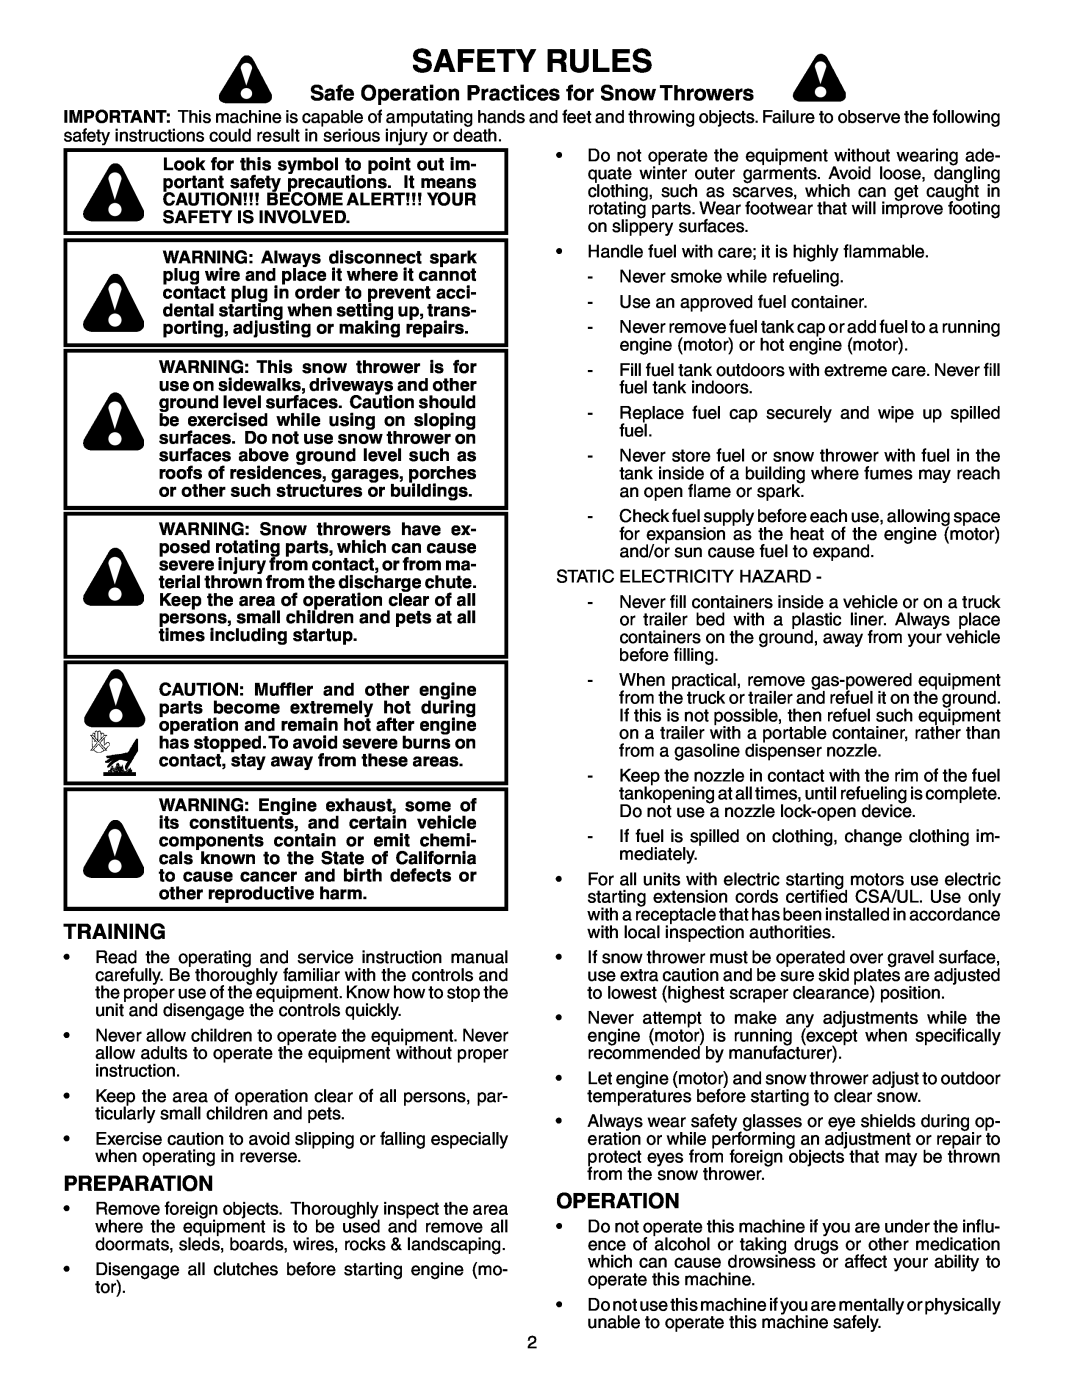 Poulan PP5524ESC owner manual Safety Rules, Safe Operation Practices for Snow Throwers, Training, Preparation 